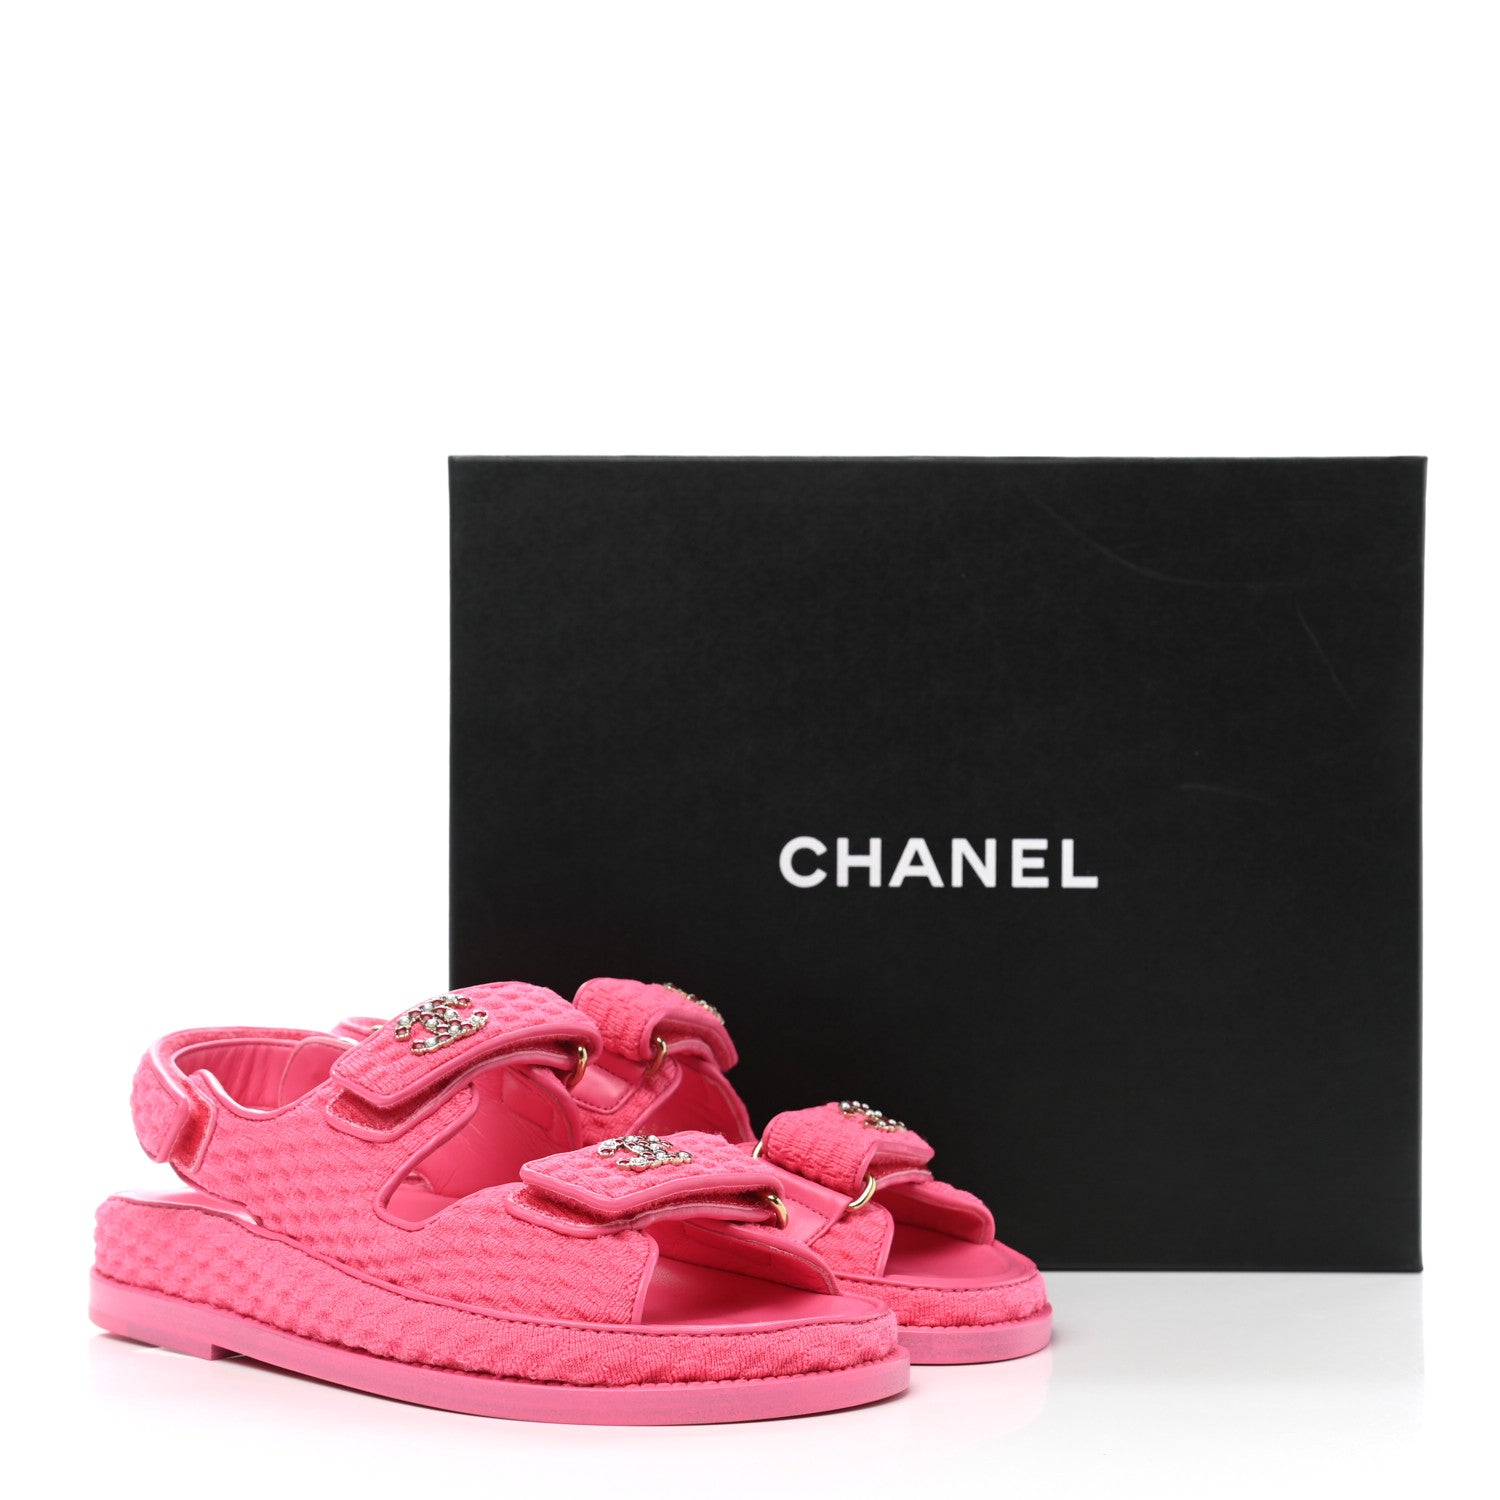 Chanel Knit Dad Sandals Pink Fabric Size 39.5 – Celebrity Owned